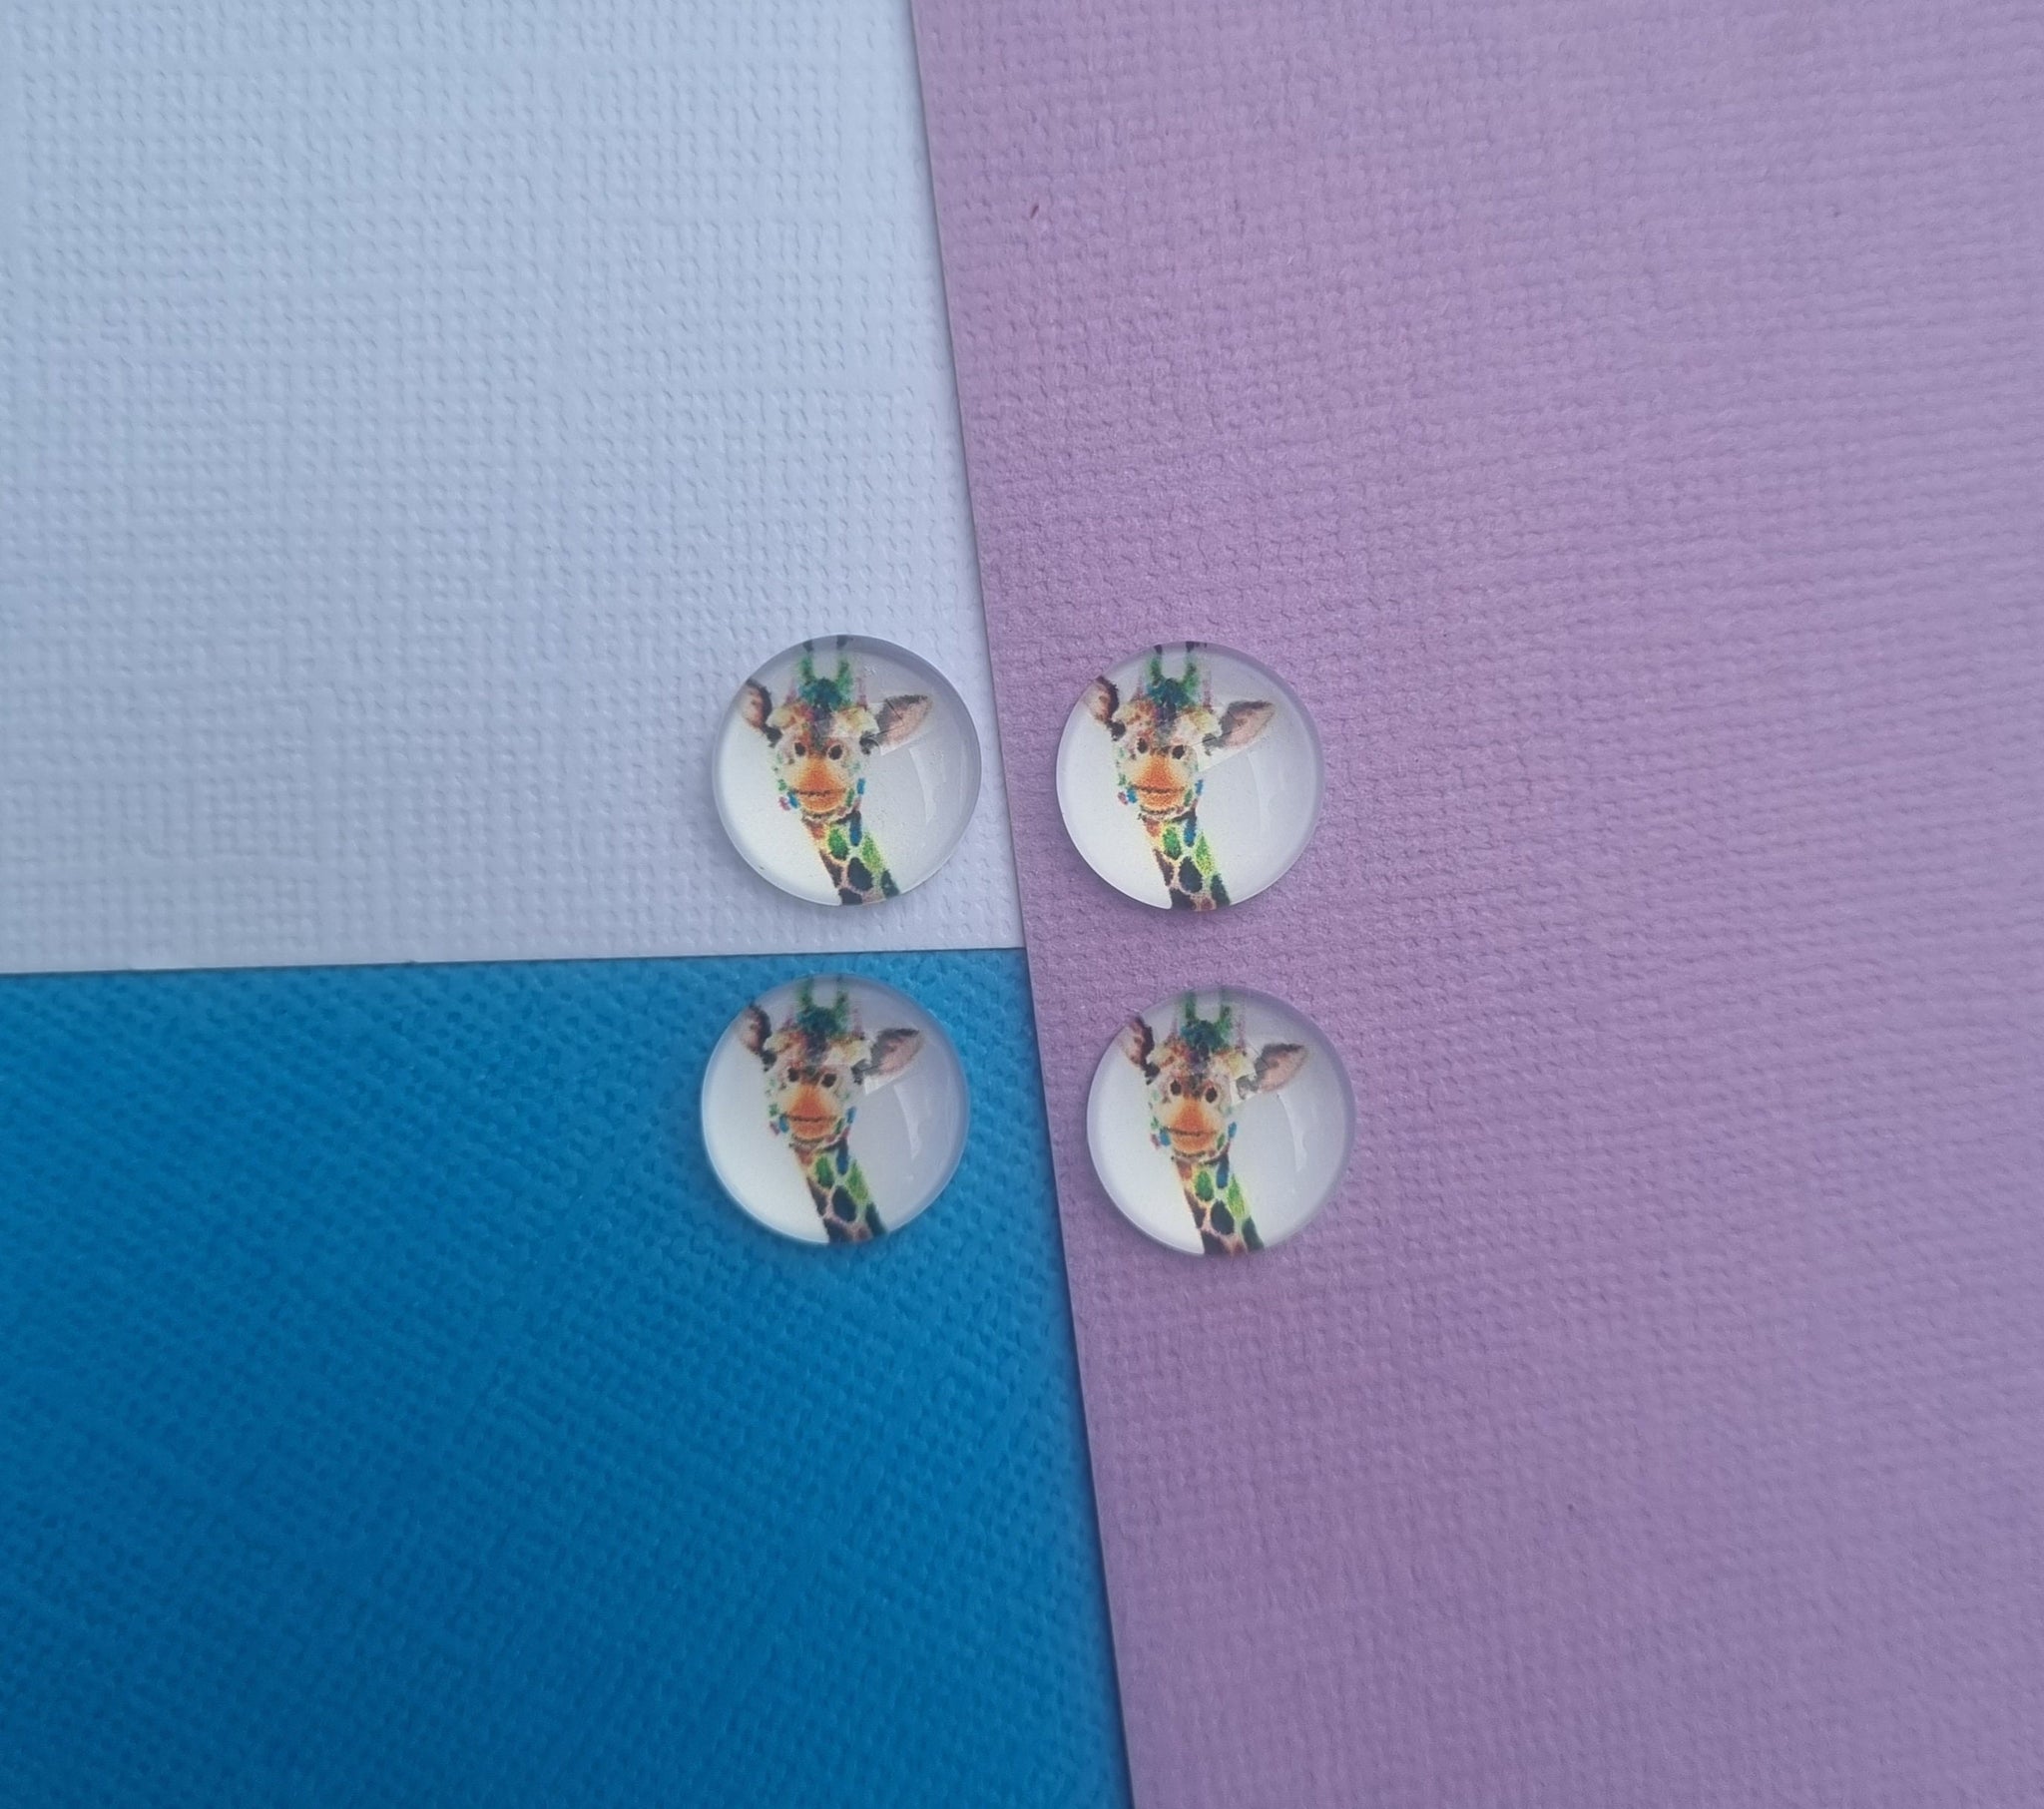 10pcs(5prs) 12mm giraffe cabochon, Glass Cabochons, Cabochons for jewellery, jewellery making Supplies, earring supplies, diy jewellery